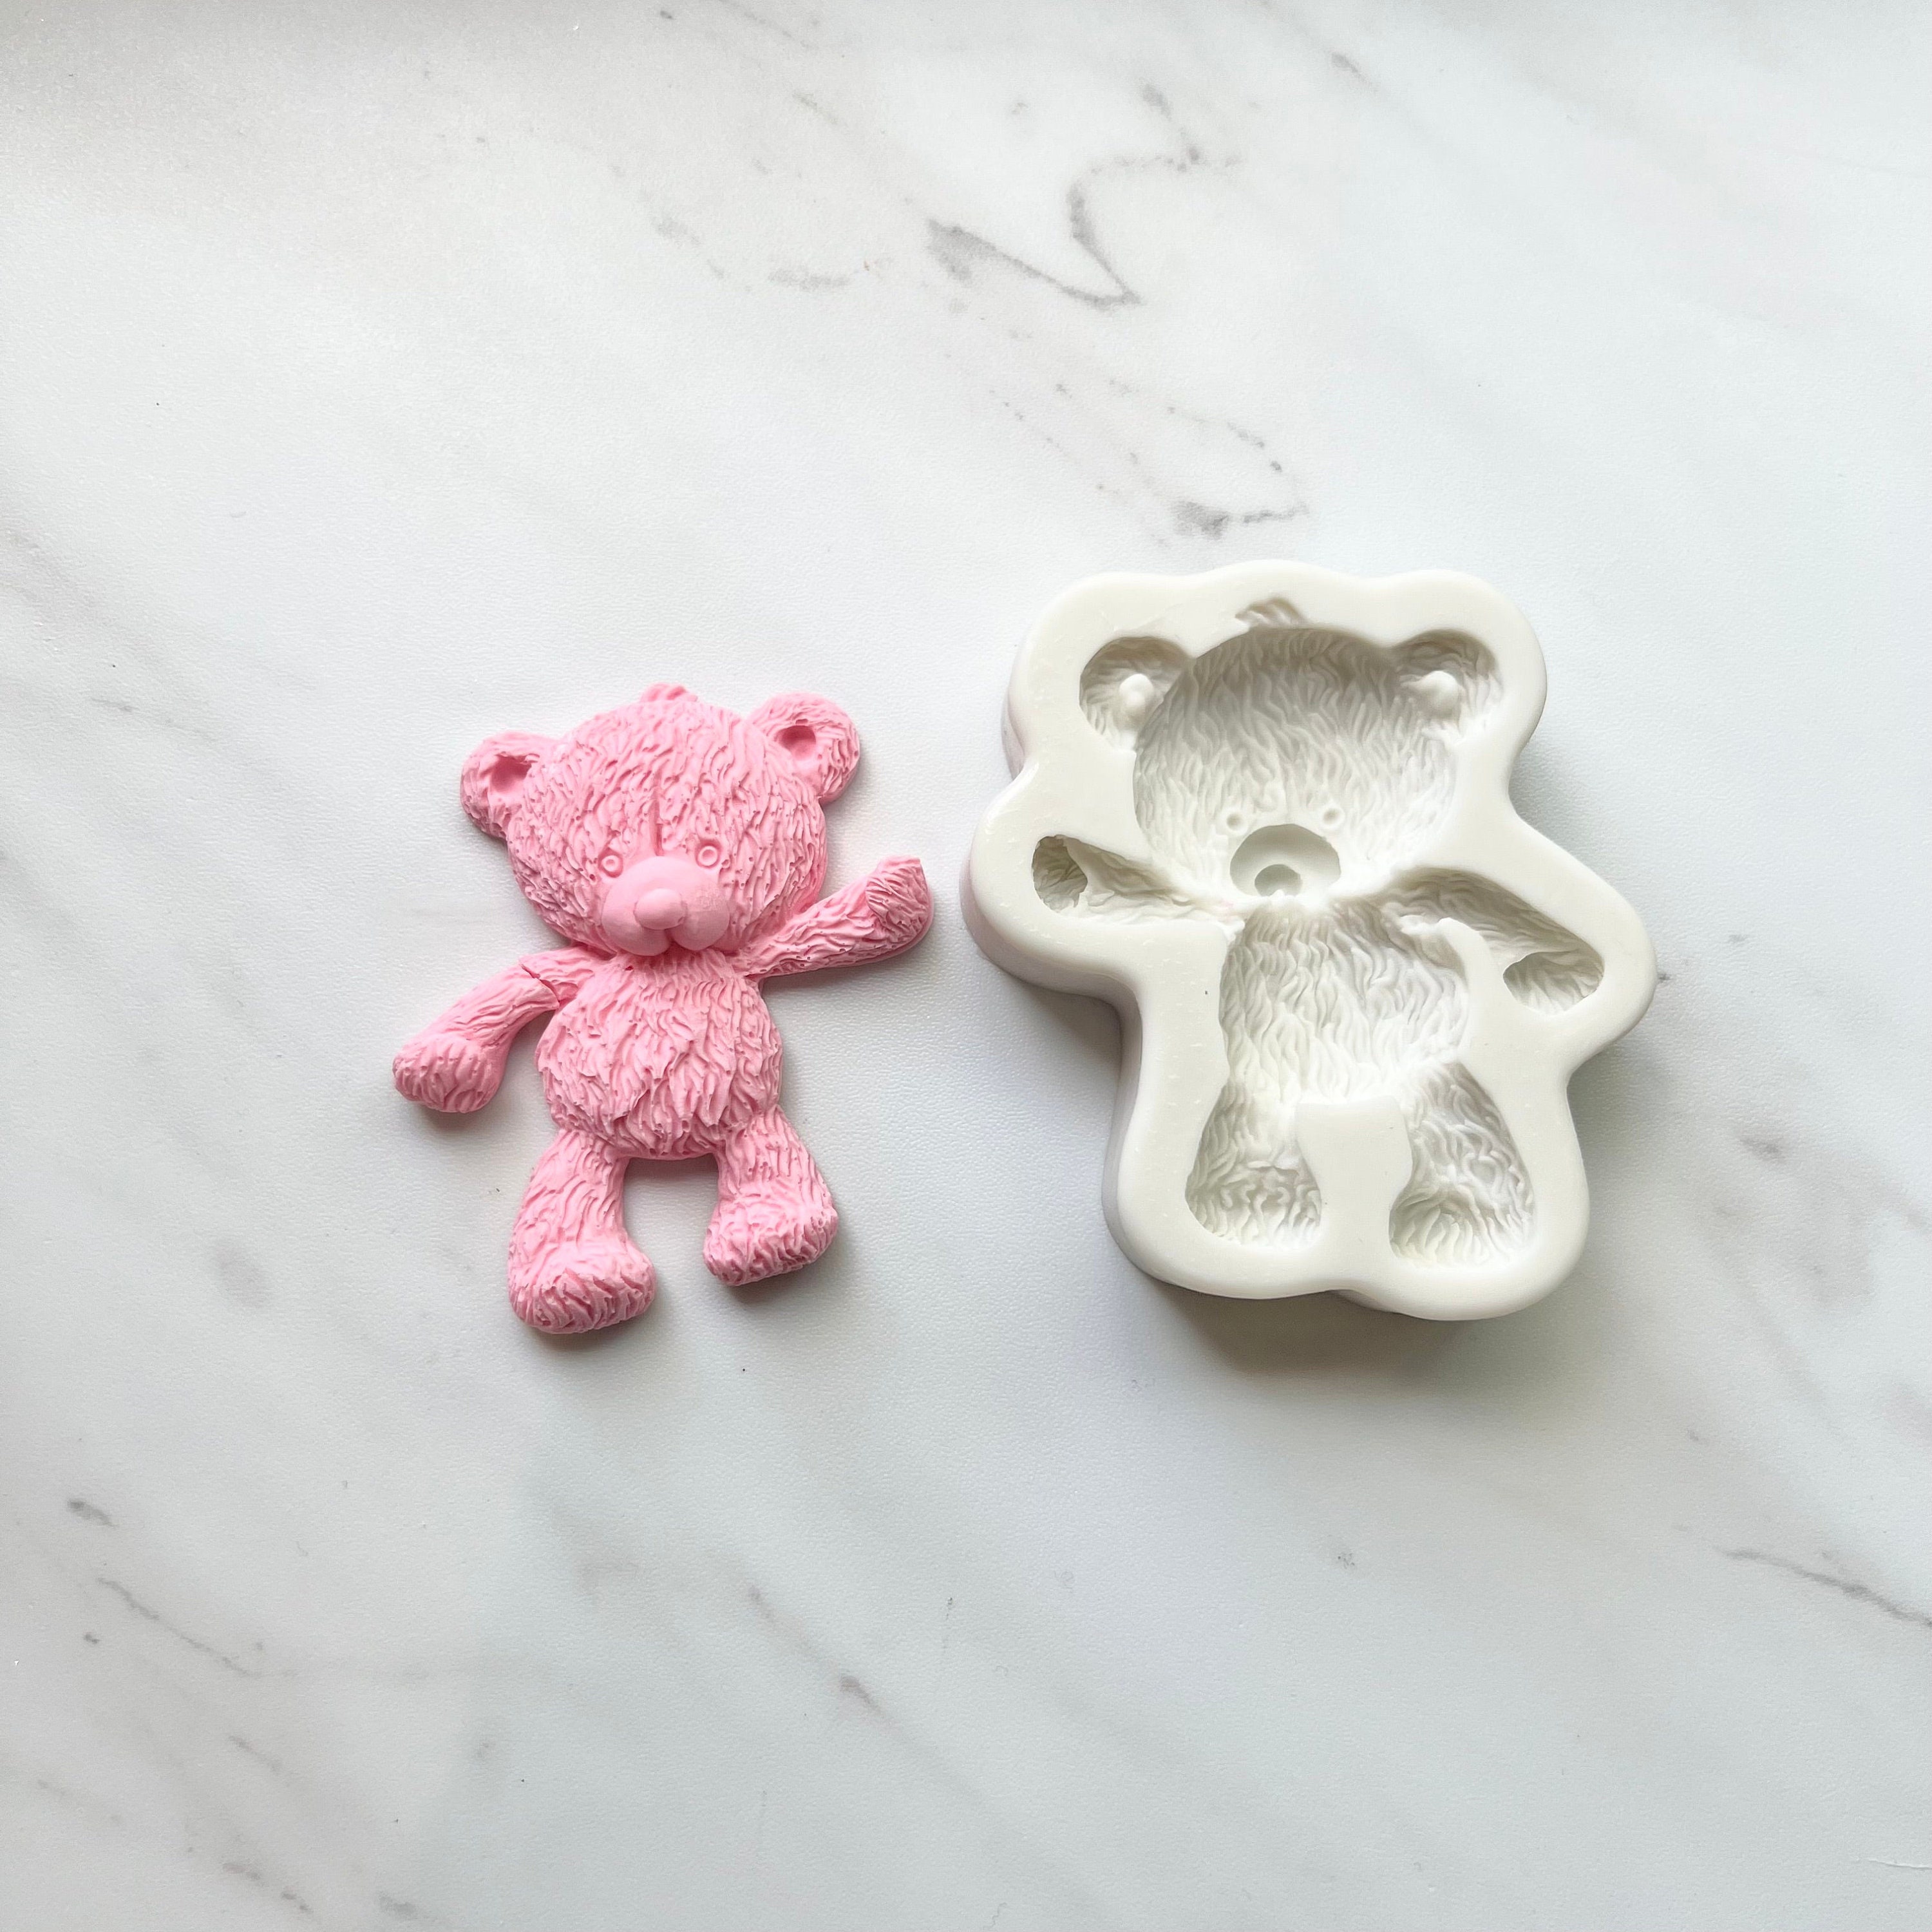 TEDDY BEAR with FLOWERS Silicone Mold